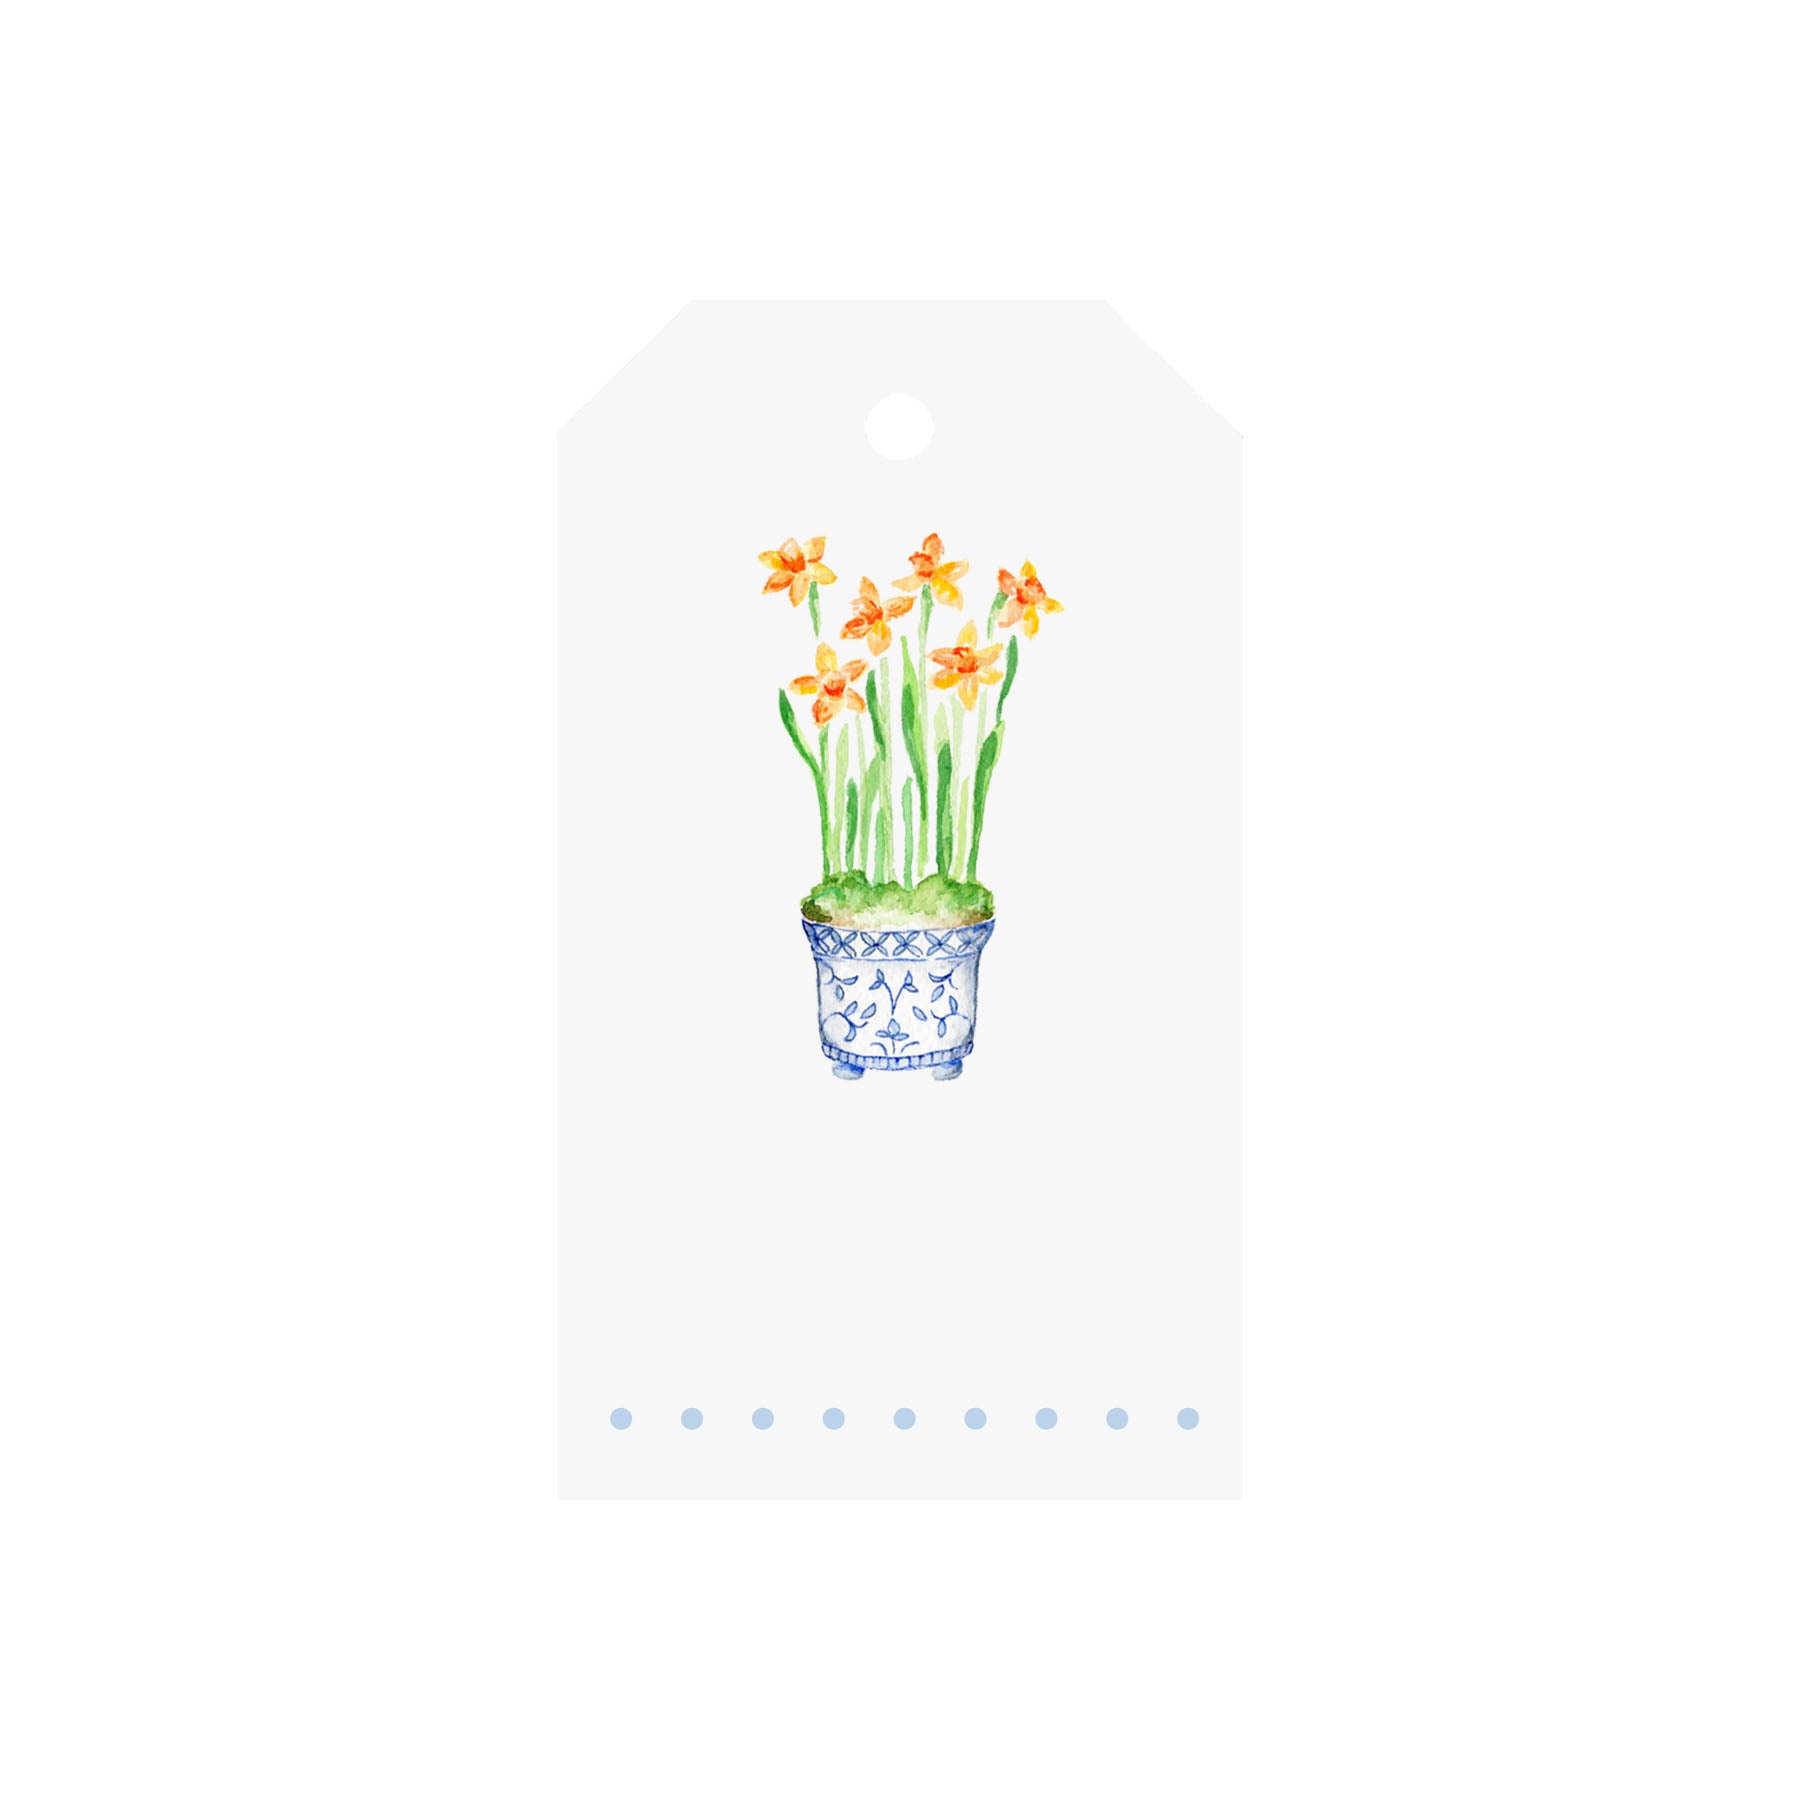 Daffodil Cachepot Luggage Gift Tags